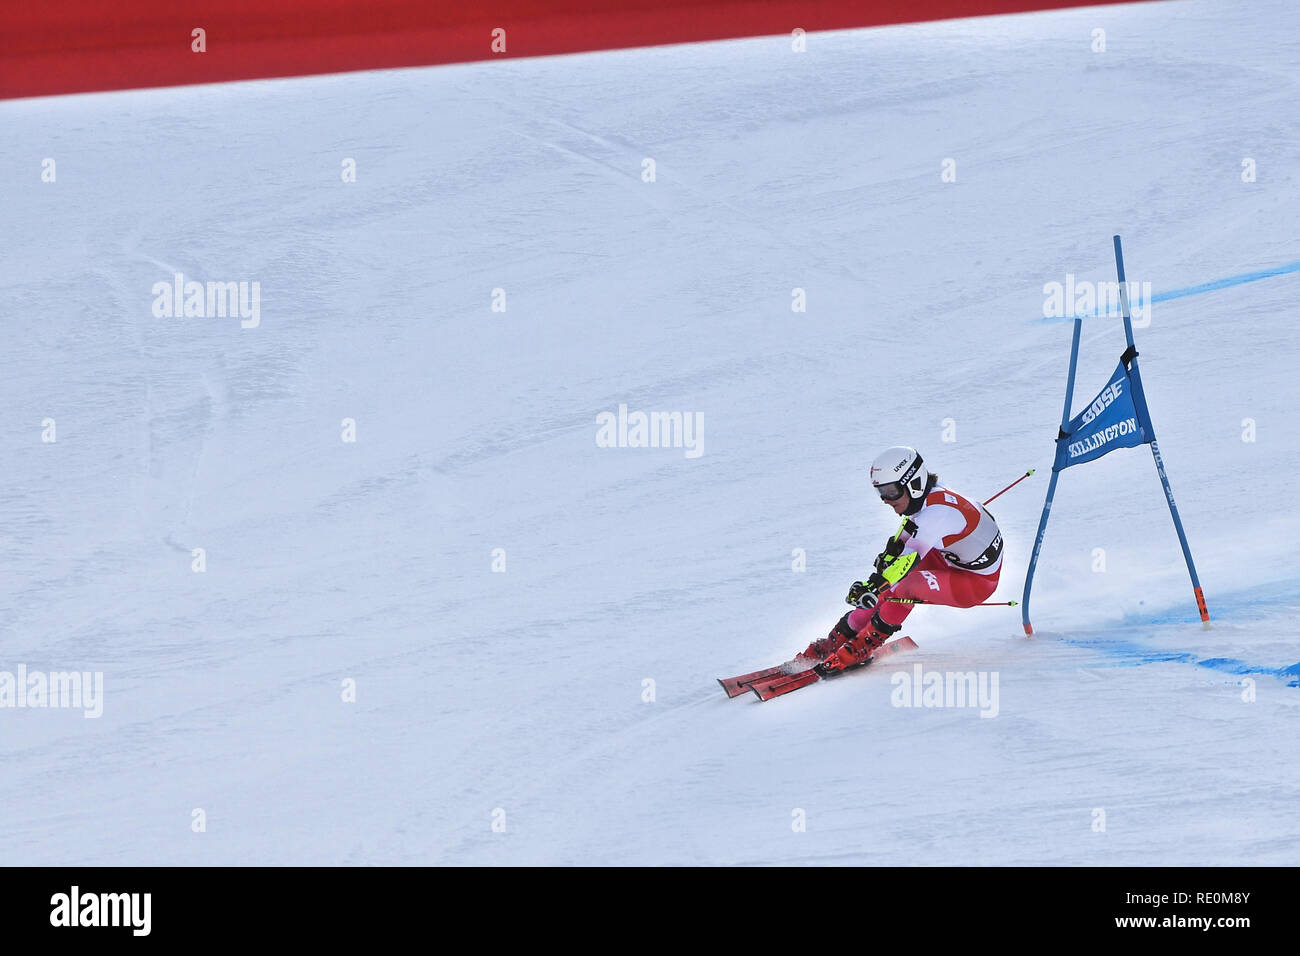 KILLINGTON, VT - NOVEMBER 24: Maryna Gasienica-Daniel of Poland in the finish area after the second run of the giant slalom. Stock Photo